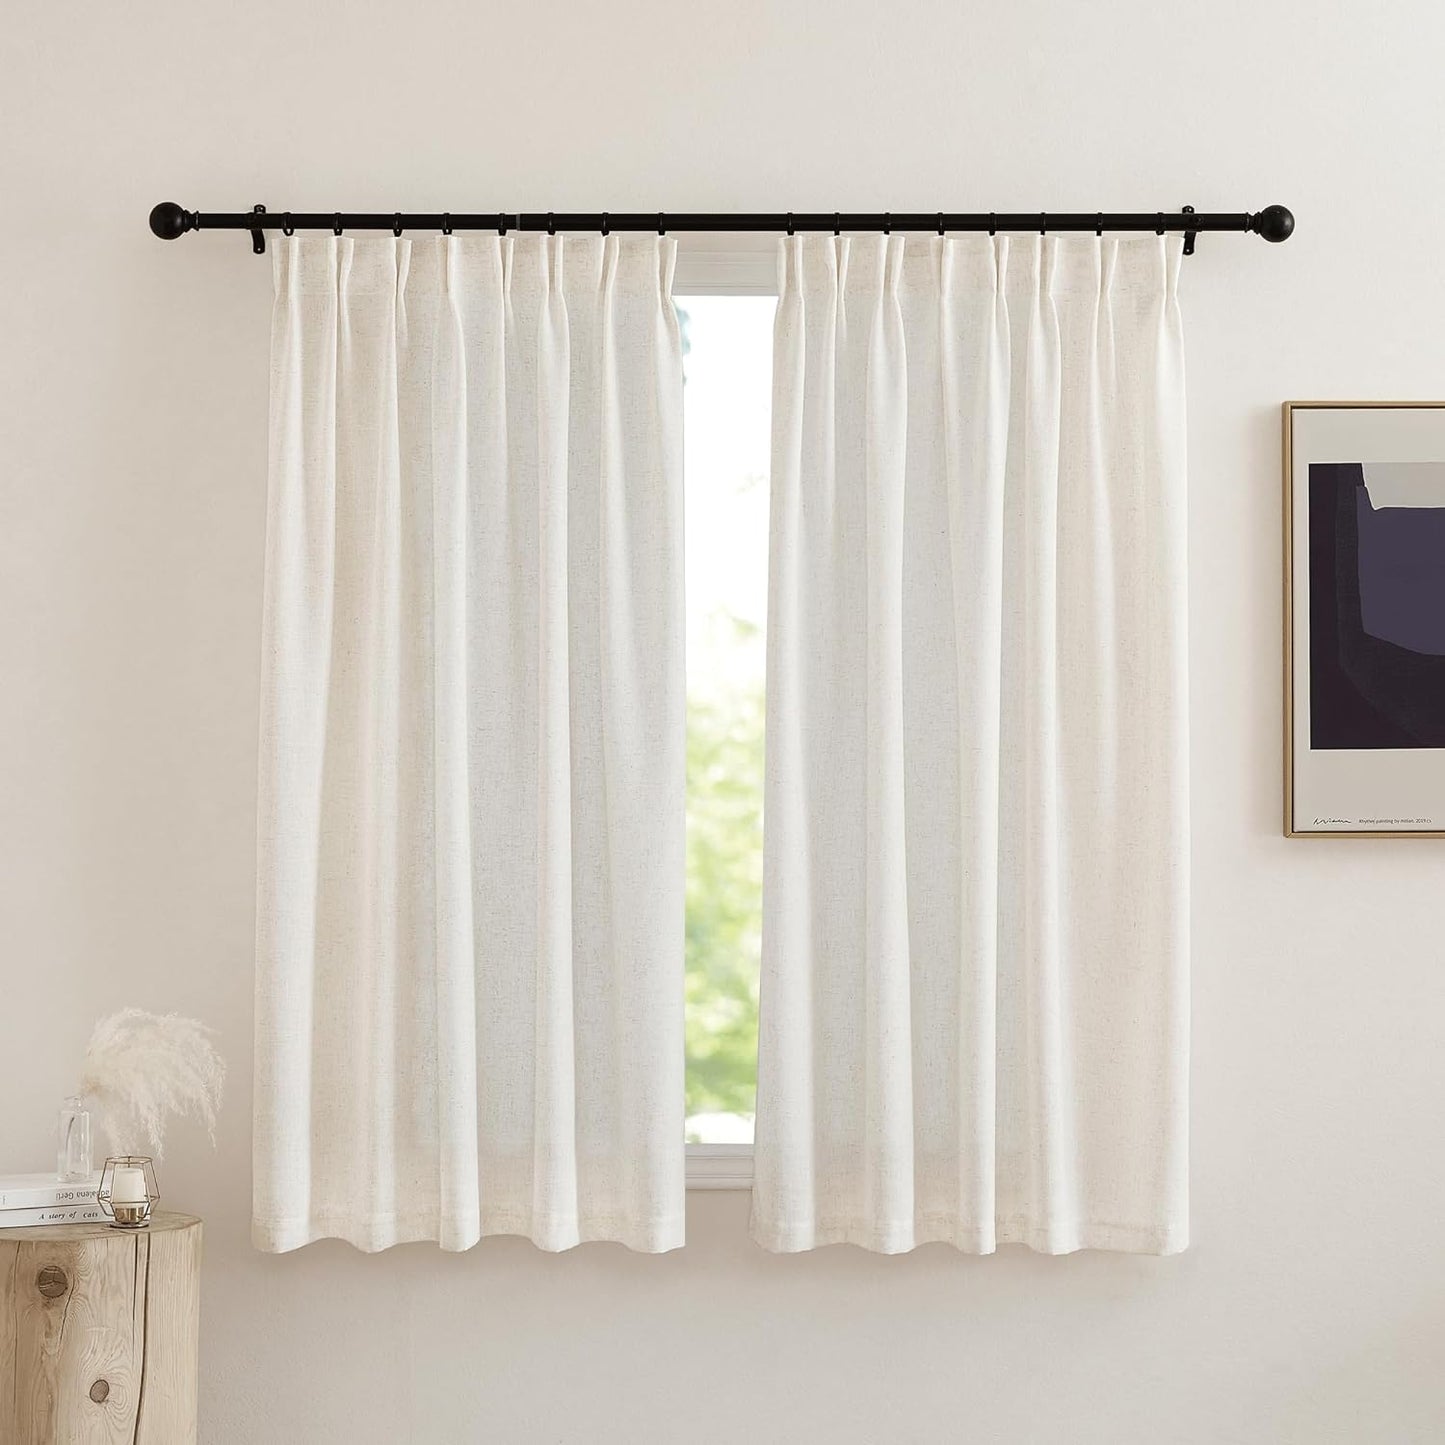 NICETOWN Linen Textured Curtain for Bedroom/Living Room Thermal Insulated Back Tab Linen Look Curtain Drapes Soft Rich Material Light Reducing Drape Panels for Window, 2 Panels, 52 X 84 Inch, Linen  NICETOWN Linen W52 X L63 